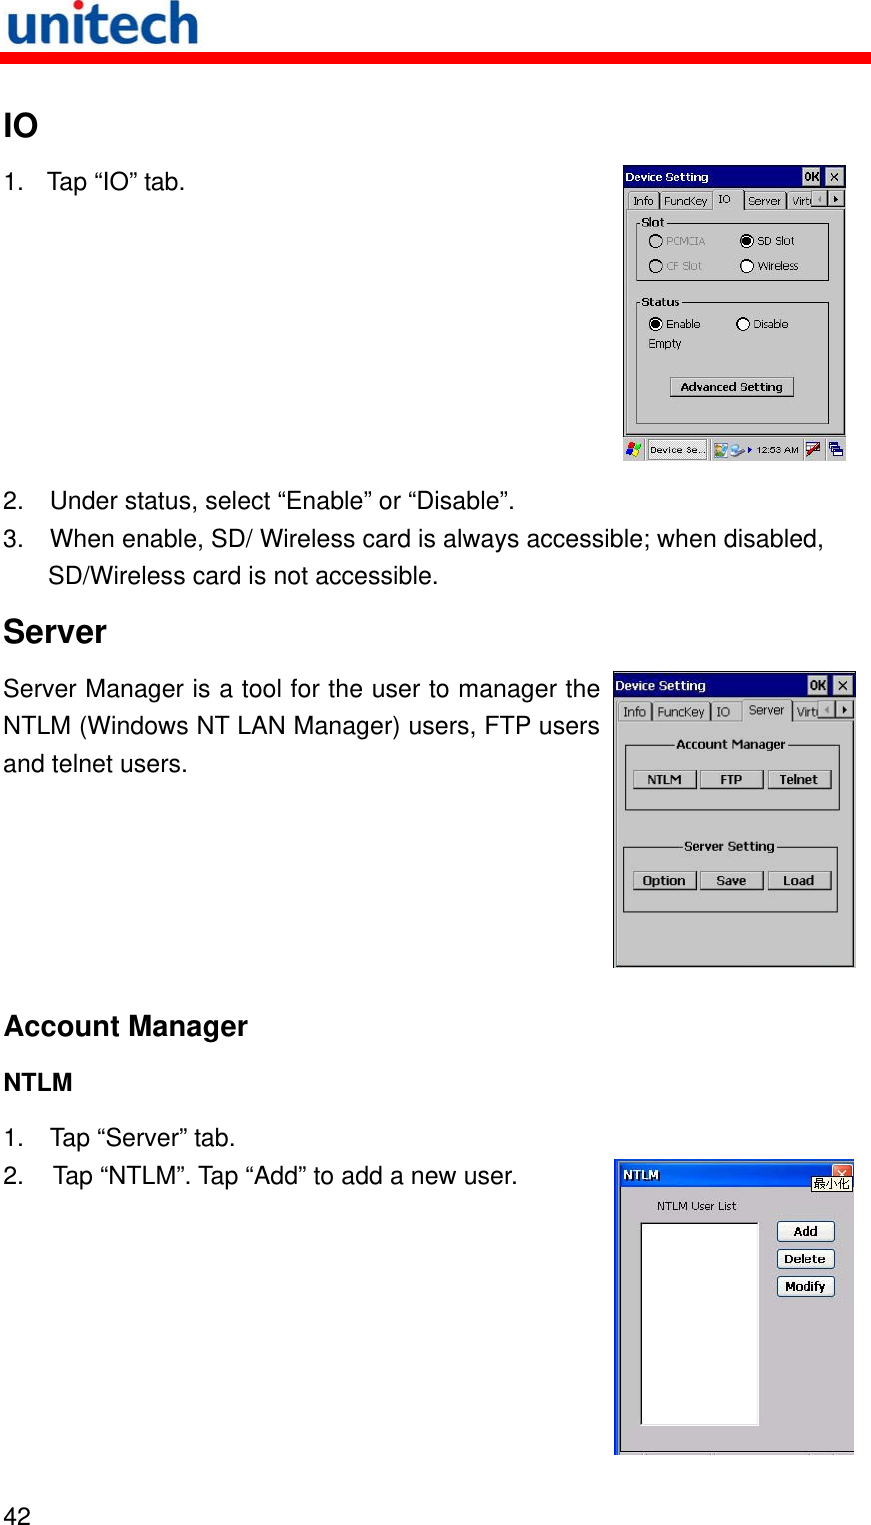   42  IO 1.  Tap “IO” tab.  2.  Under status, select “Enable” or “Disable”.   3.  When enable, SD/ Wireless card is always accessible; when disabled, SD/Wireless card is not accessible. Server Server Manager is a tool for the user to manager the NTLM (Windows NT LAN Manager) users, FTP users and telnet users. Account Manager NTLM 1. Tap “Server” tab. 2.  Tap “NTLM”. Tap “Add” to add a new user. 